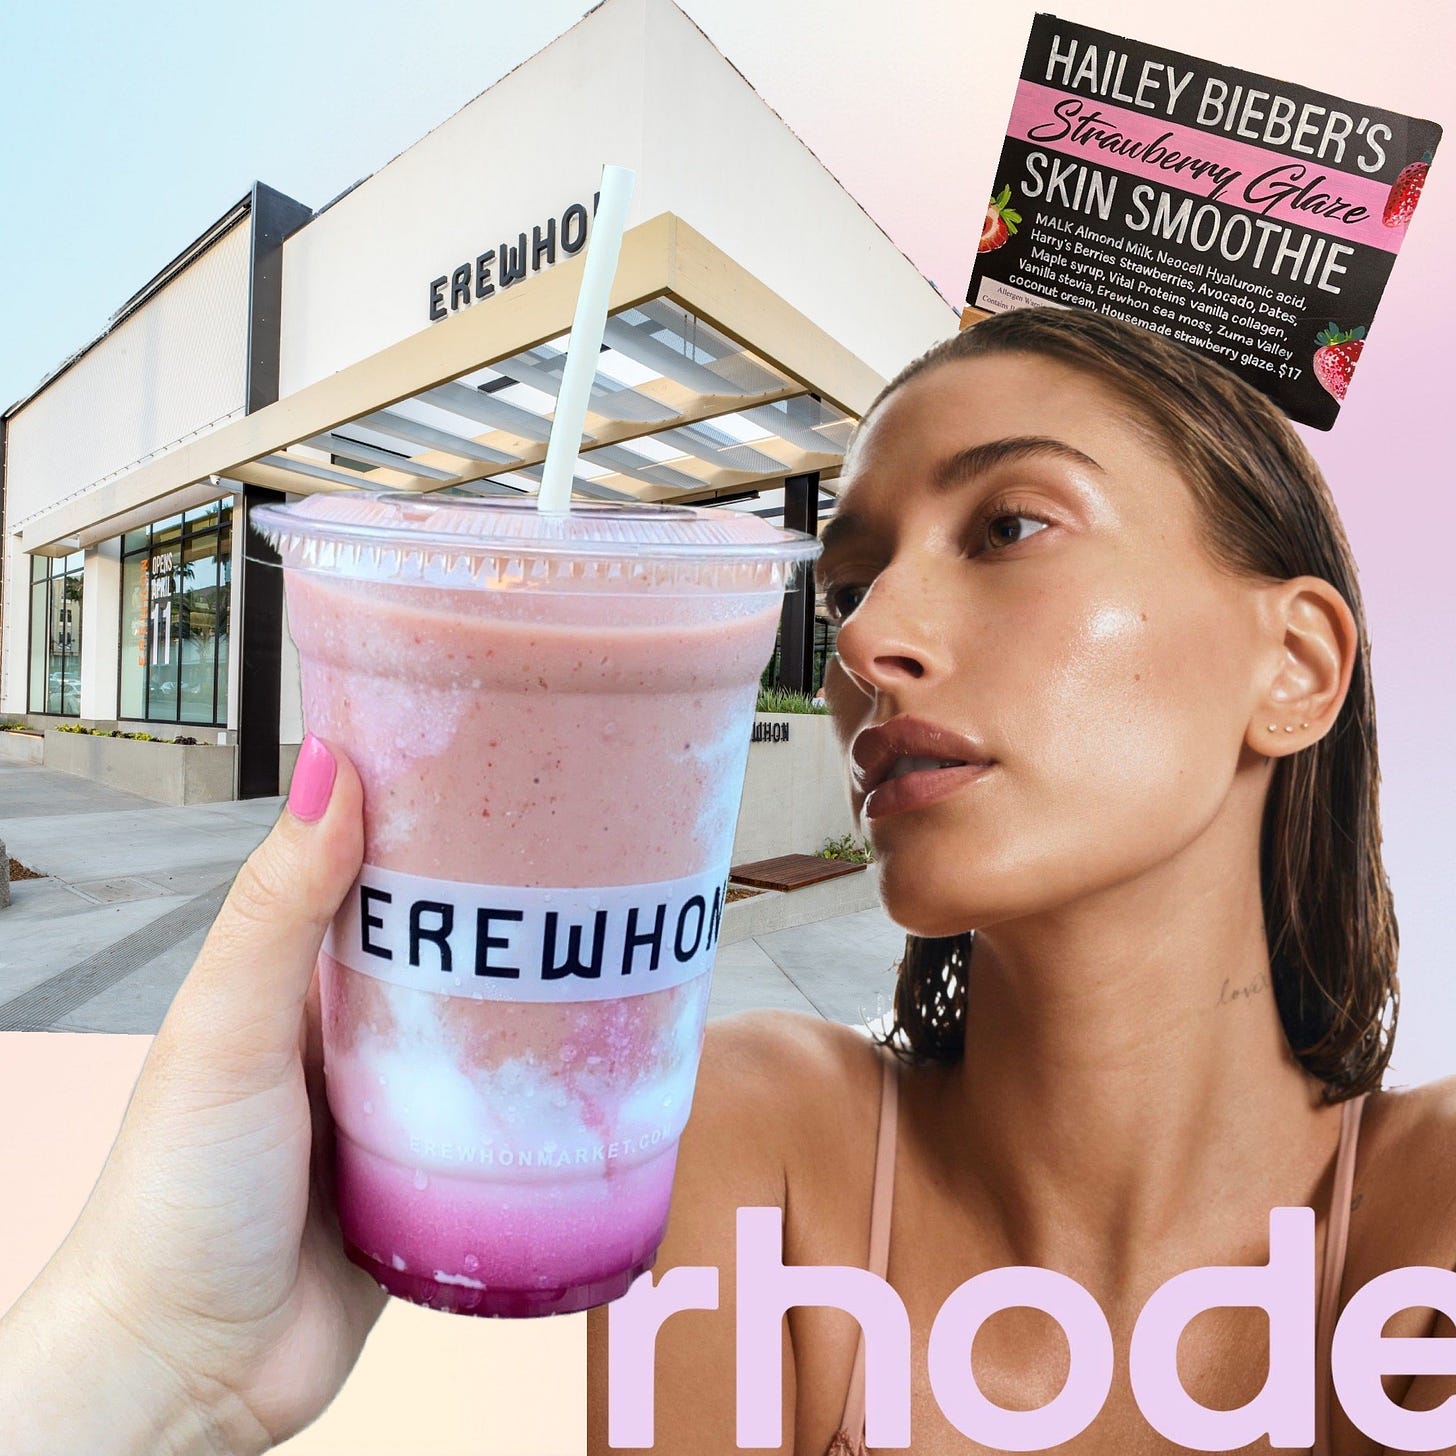 I Tried Hailey Bieber's Erewhon Smoothie: My Review — SNOBBISH